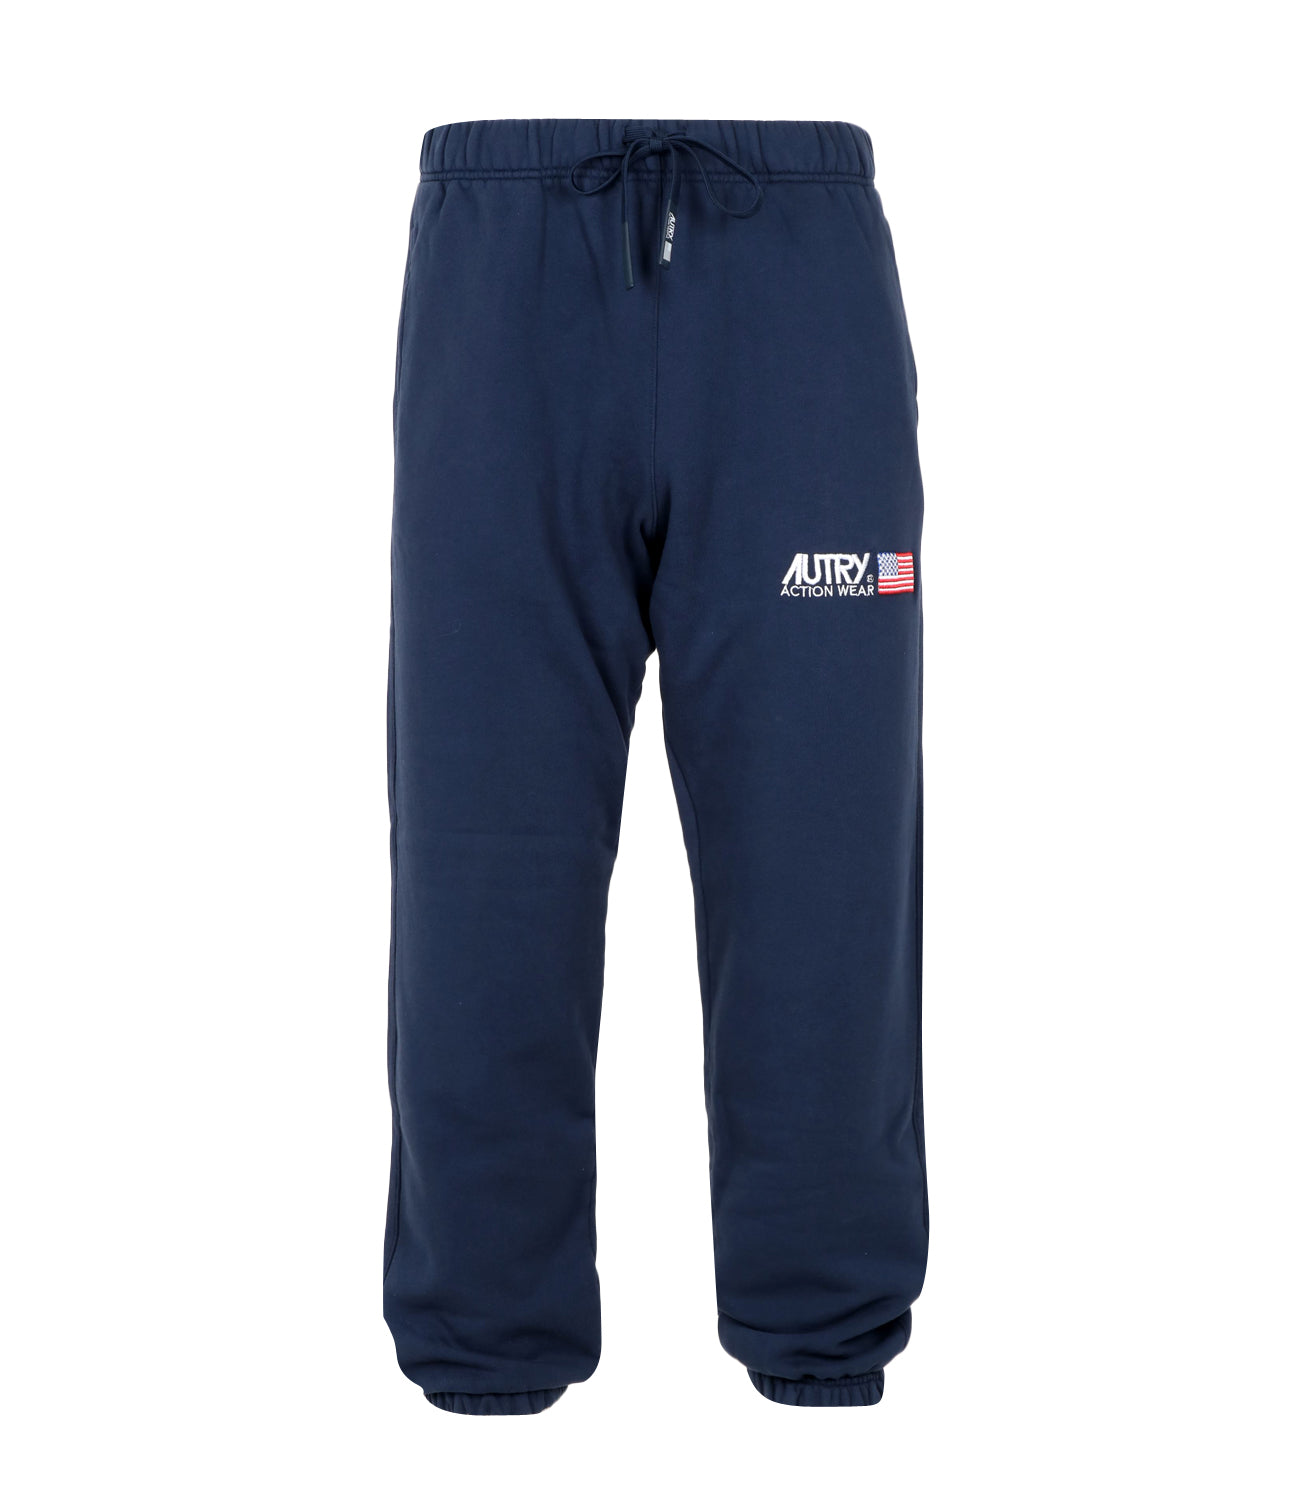 Autry | Iconic Hembro Blue Sports Pant